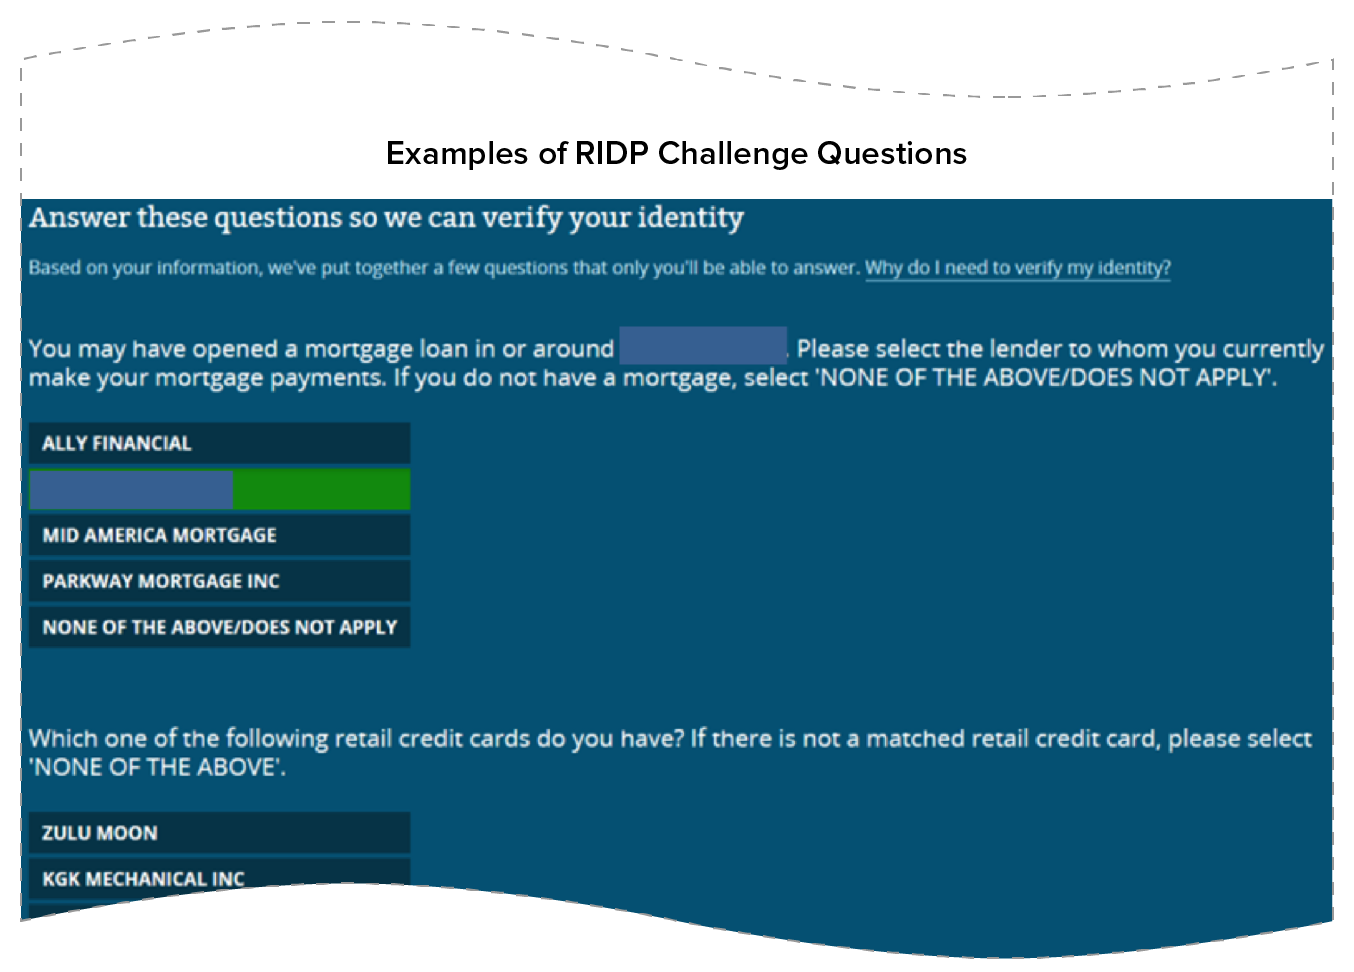 Examples of RIDP Challenge Questions